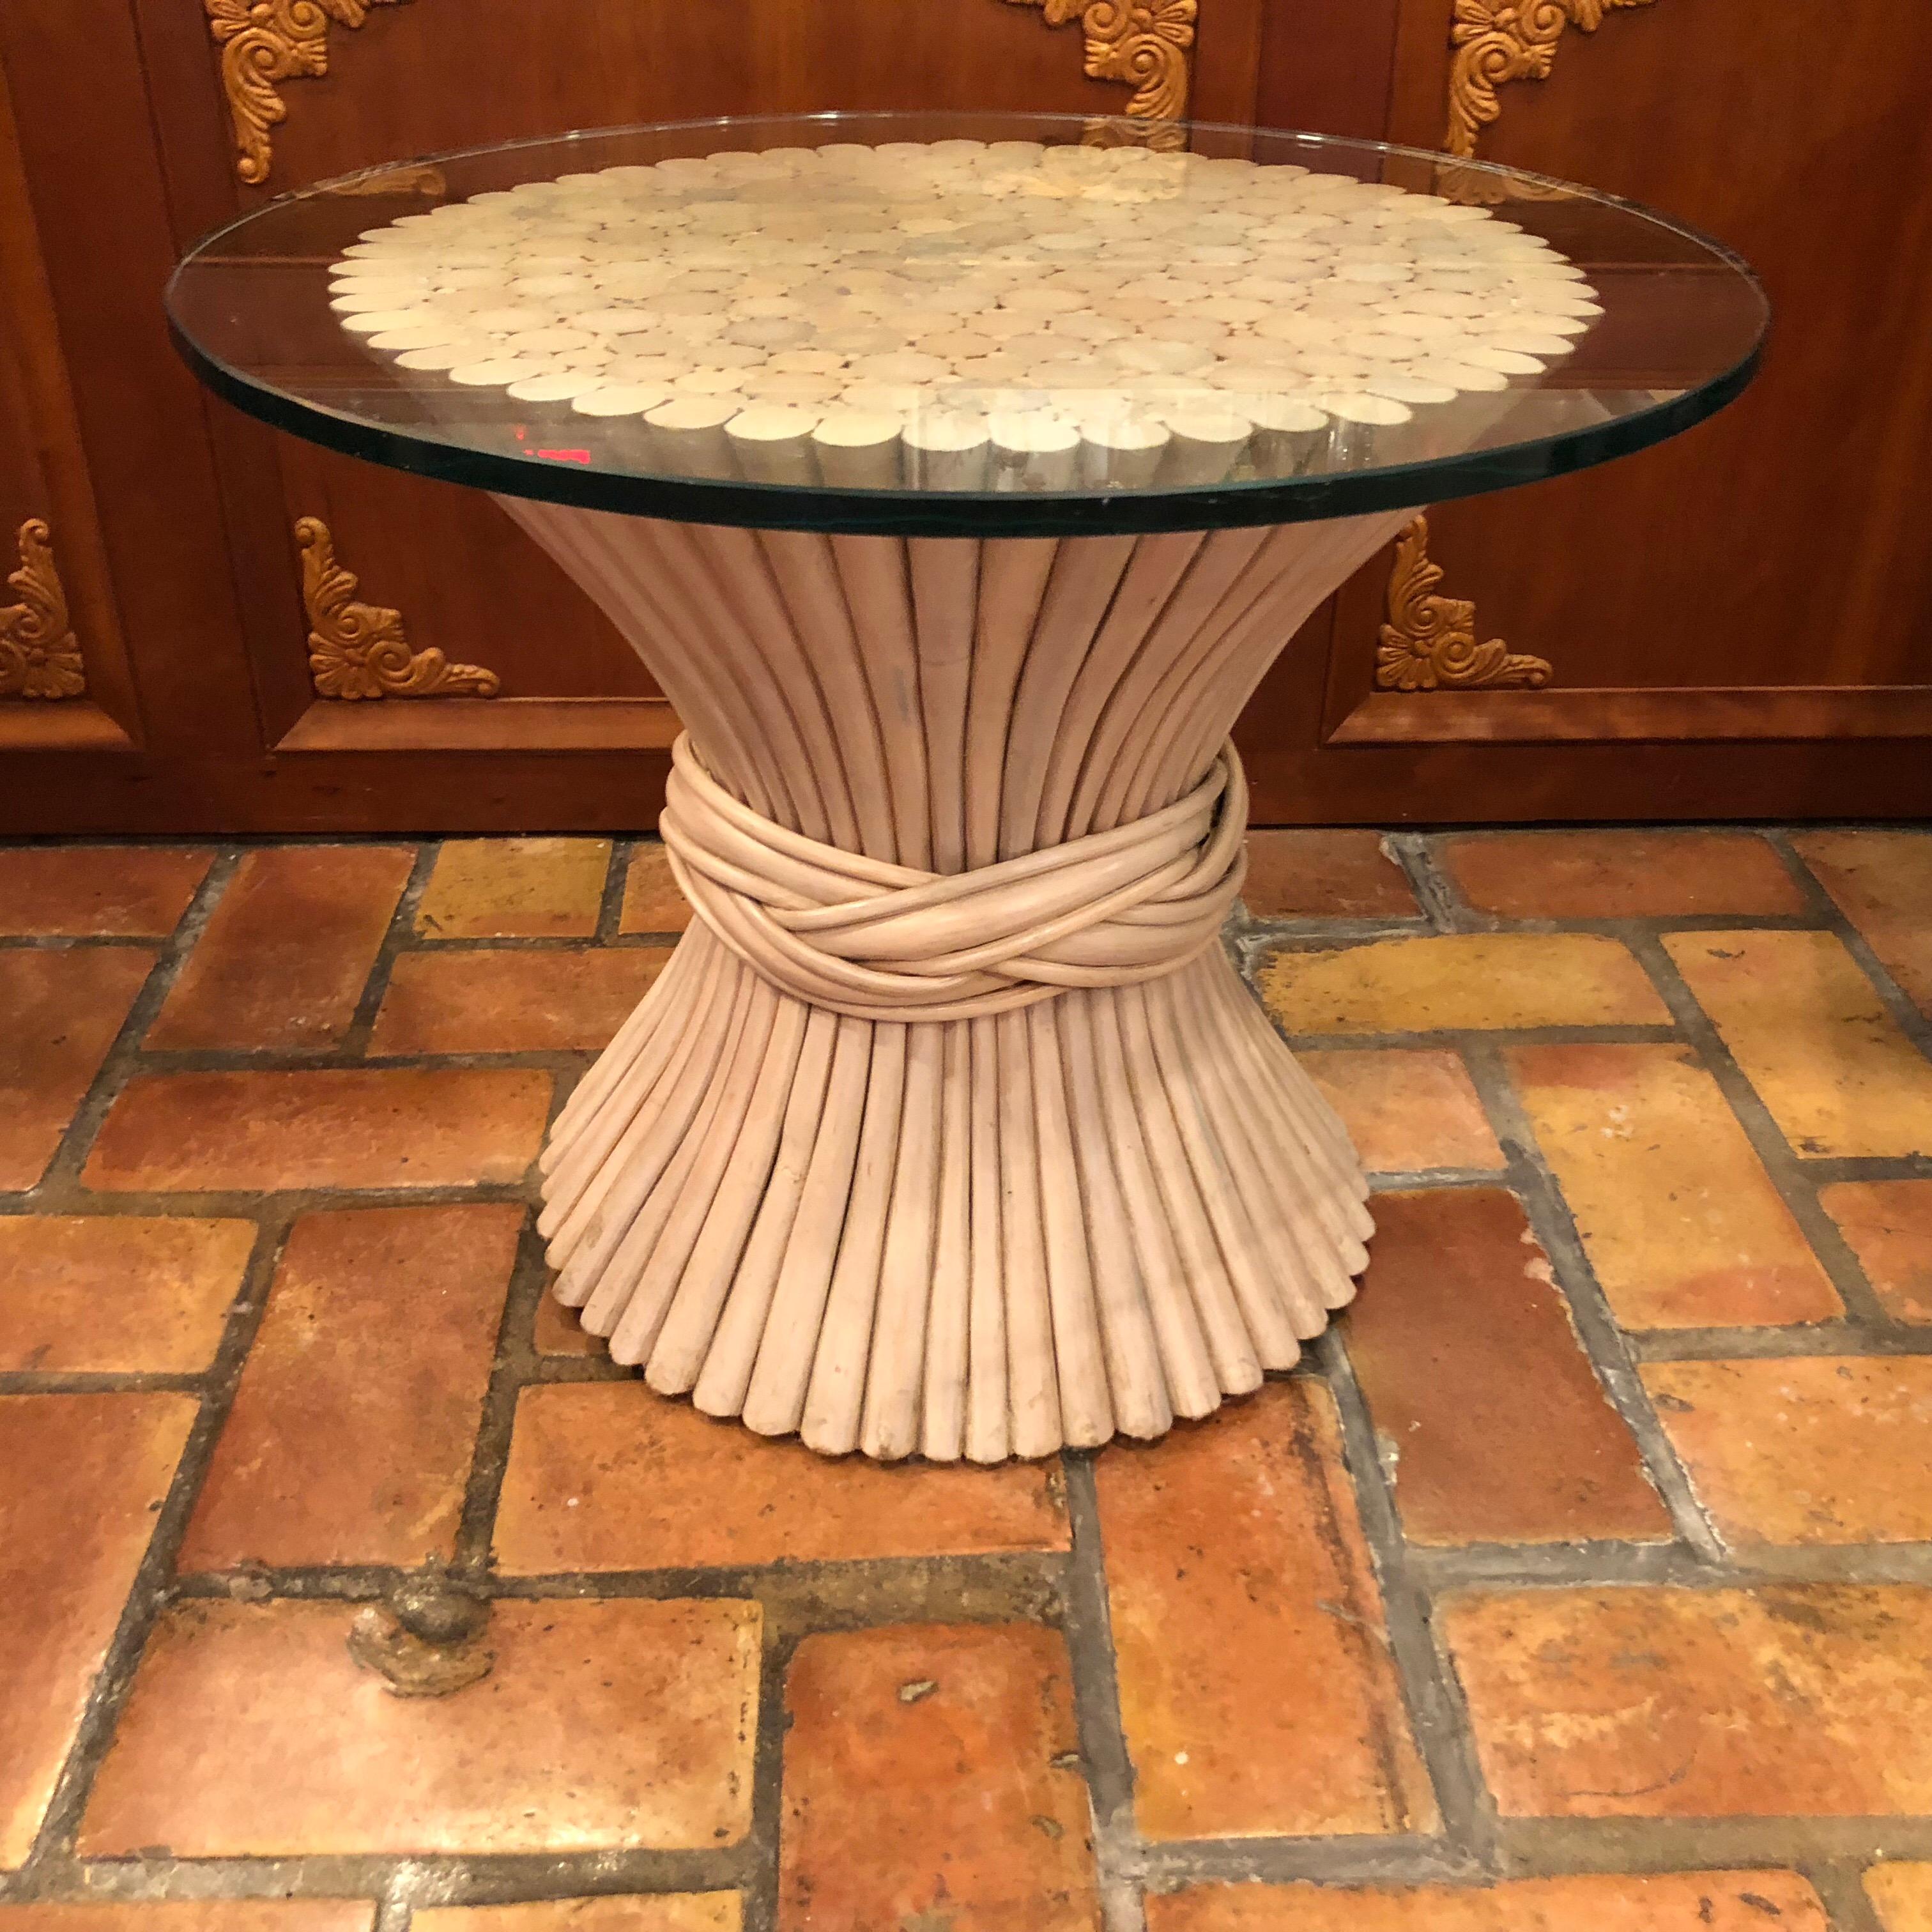 McGuire Bamboo side table wheat sheath base. Nice size side or end table, perfect for in between a pair of chairs. Nice finish and texture. Thick round glass top evenly balance on this channeled bamboo sculptural base.
Light whitewash finish on